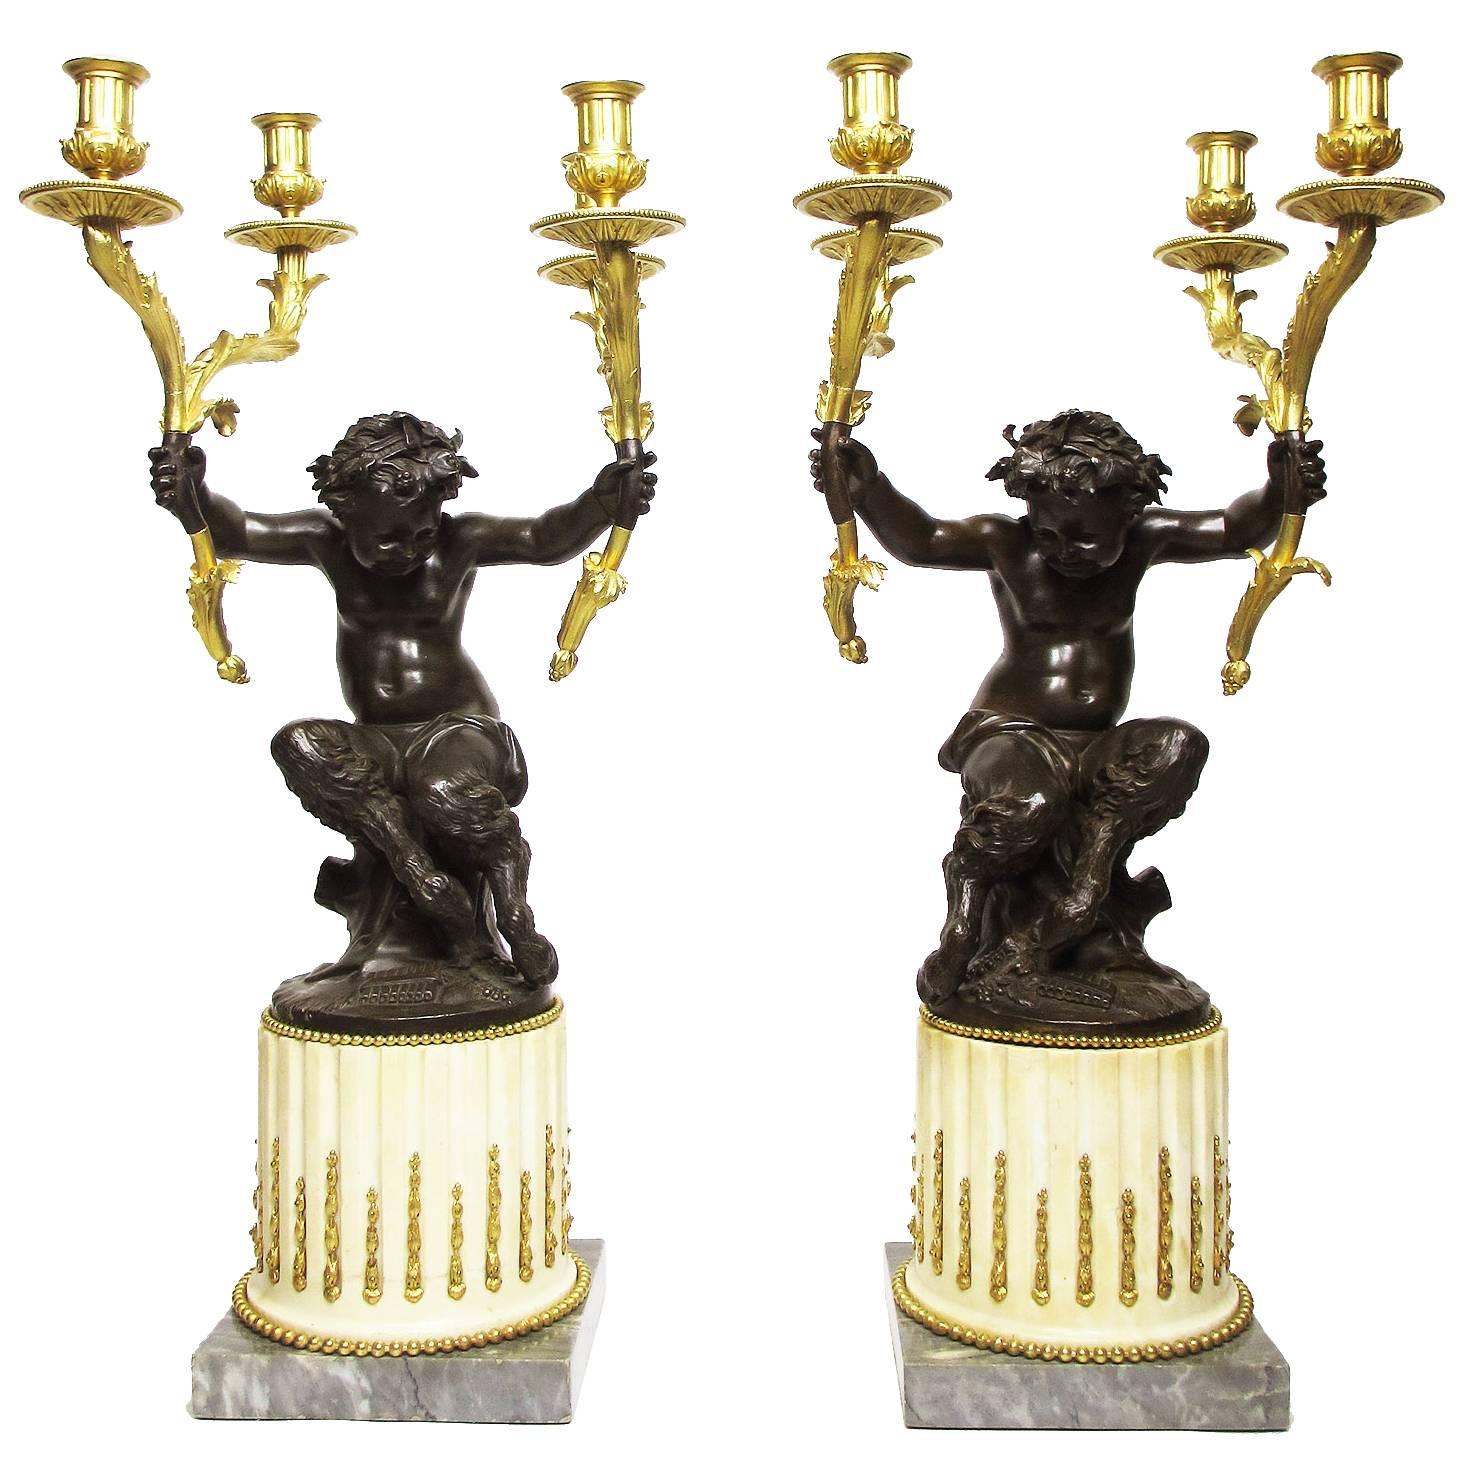 Fine Pair of French 19th Century Gilt and Patinated Bronze Figural Candelabra For Sale